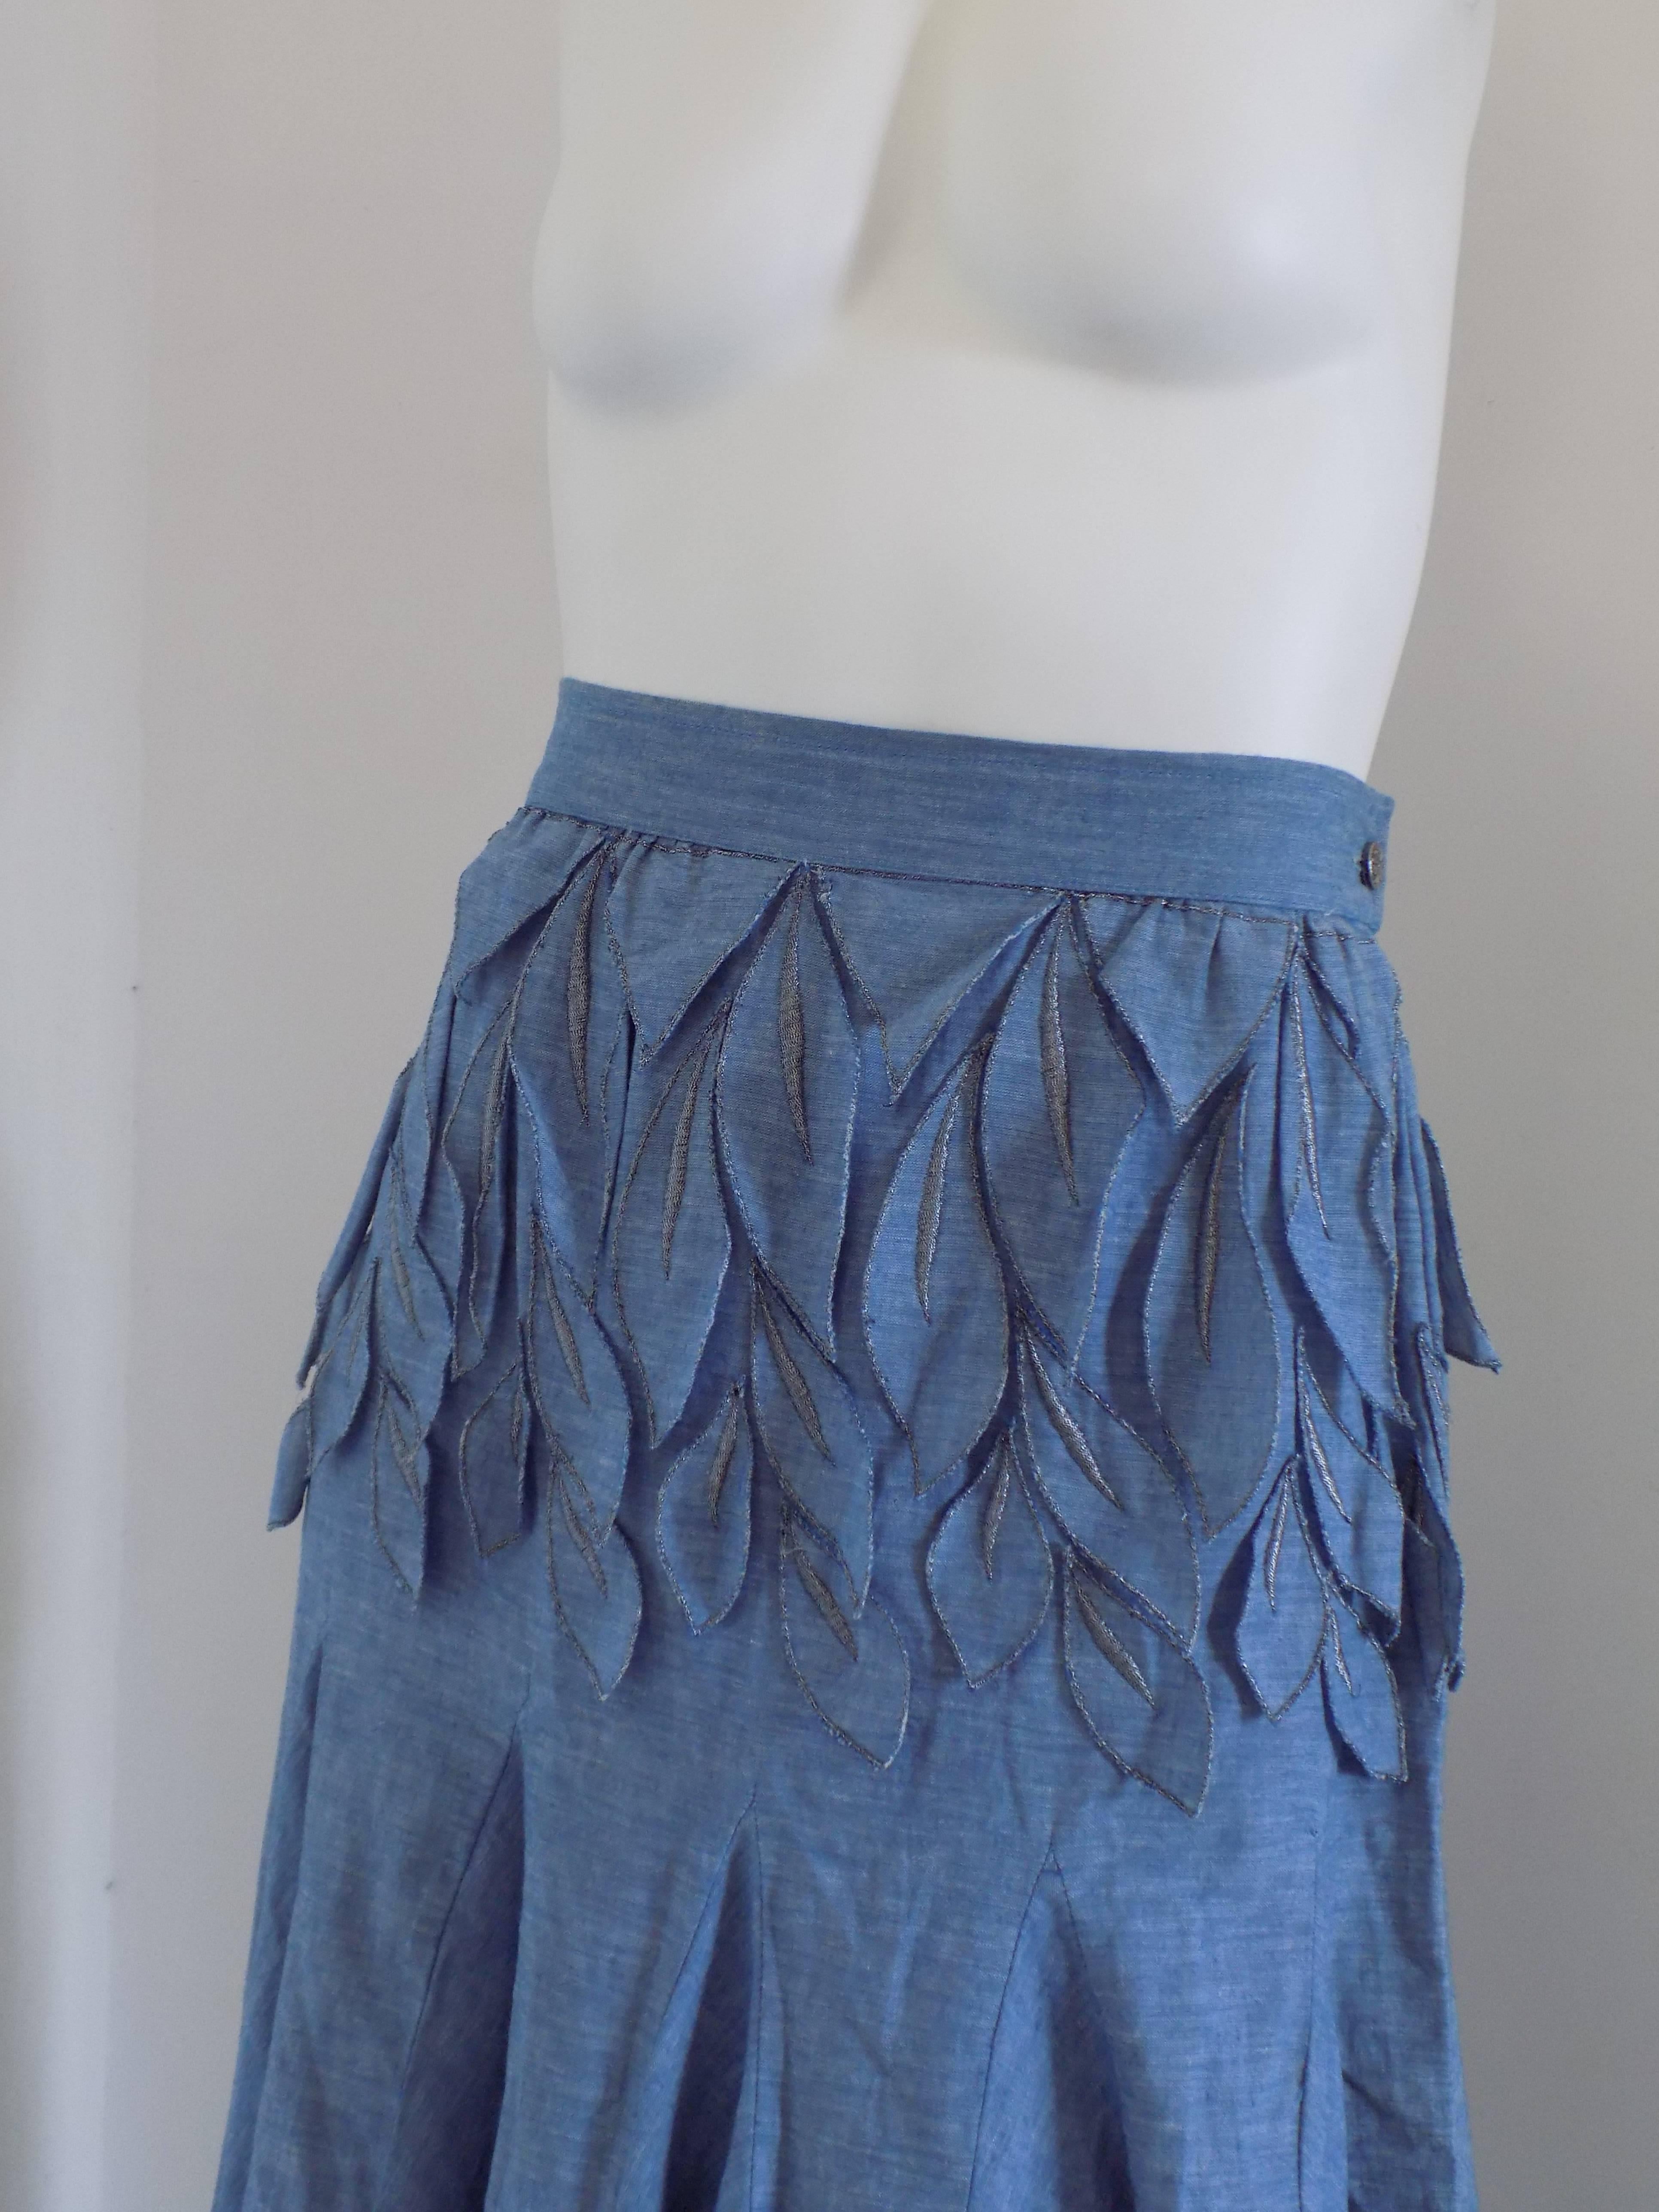 1980s Carlito Blu denim skirt

Blu denim skirt with leaves on the top totally made in italy in 100% cotton
italian size range 44
Waist 70 cm 
total lenght 82 cm